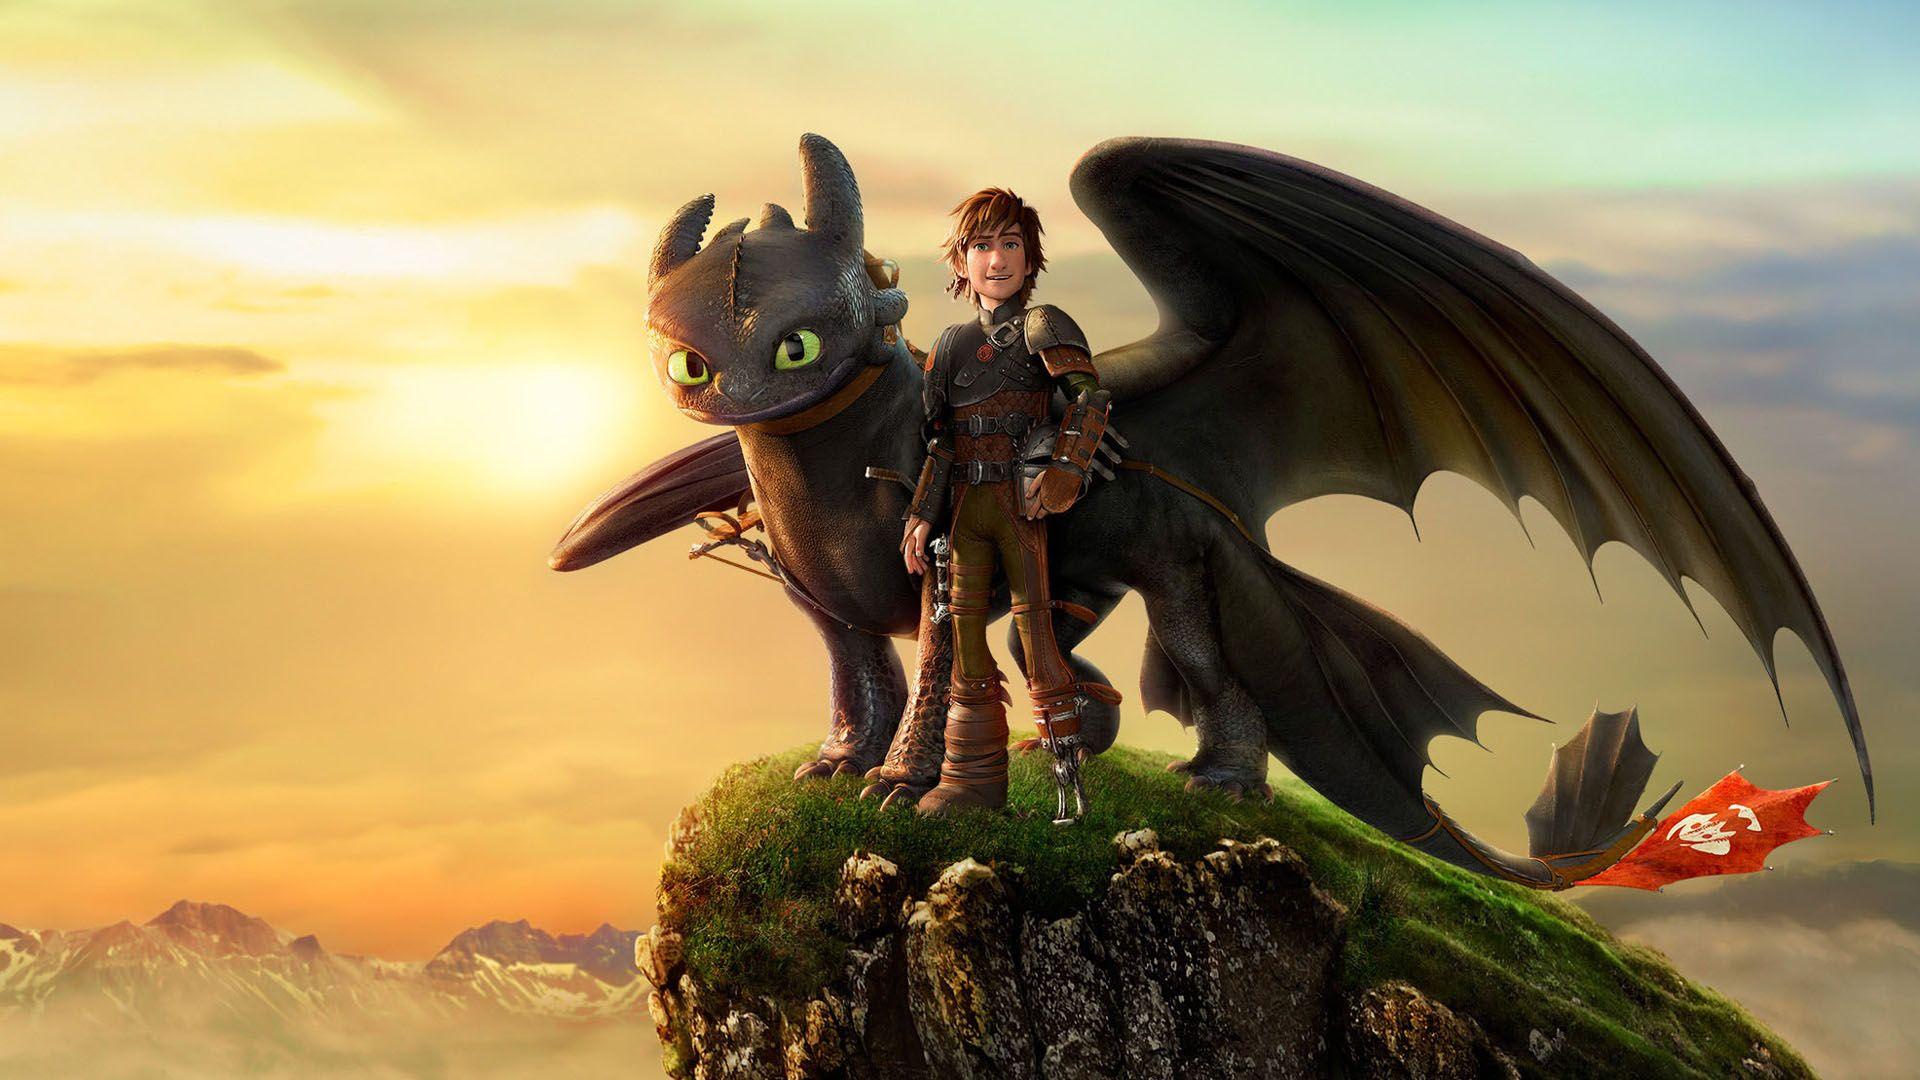 How to Train Your Dragon 2 Wallpaper Free How to Train Your Dragon 2 Background